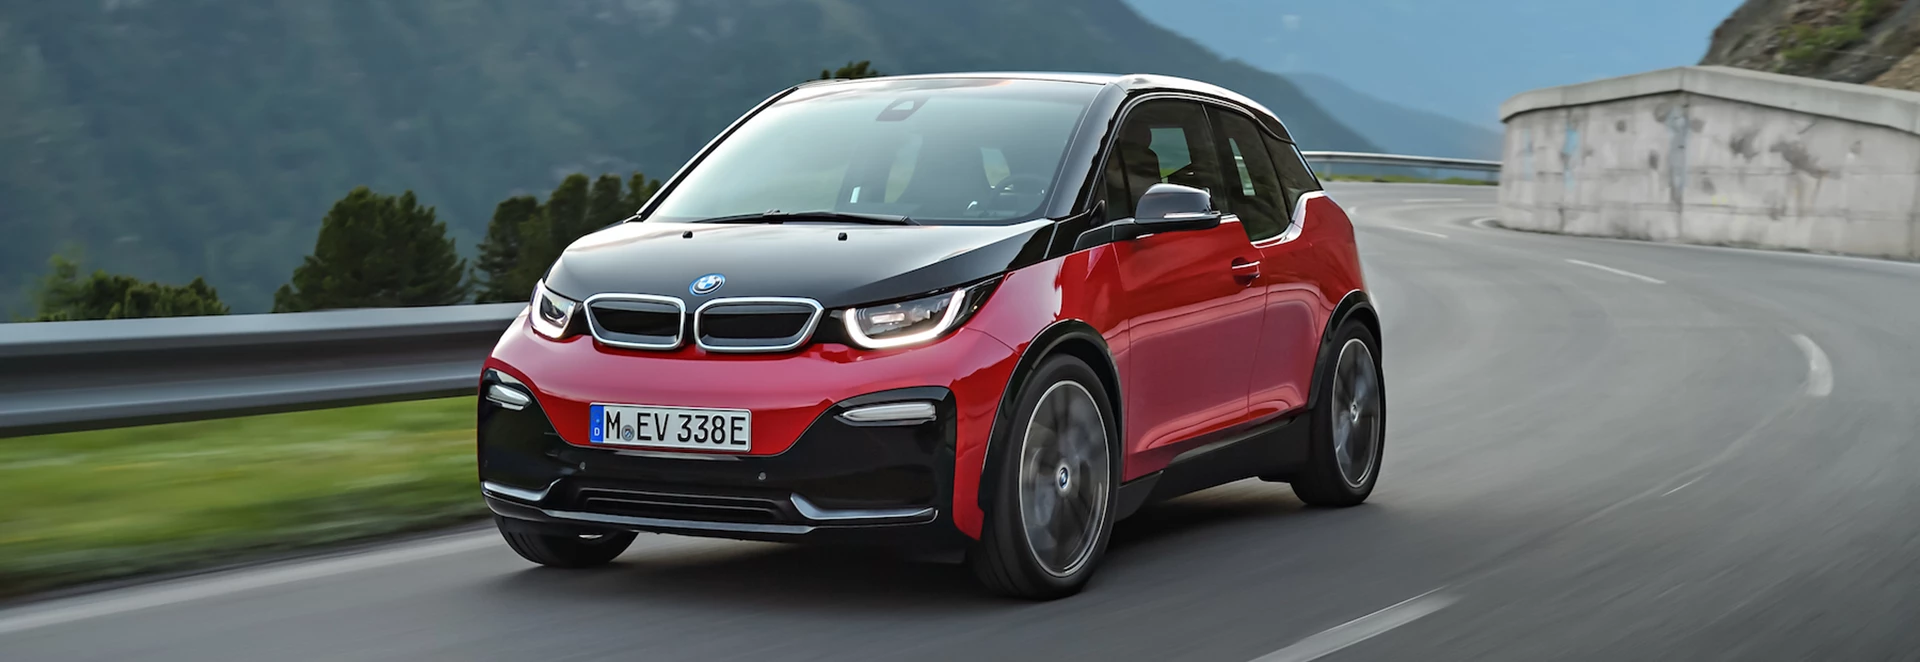 BMW Group electric sales pass 400,000 marker